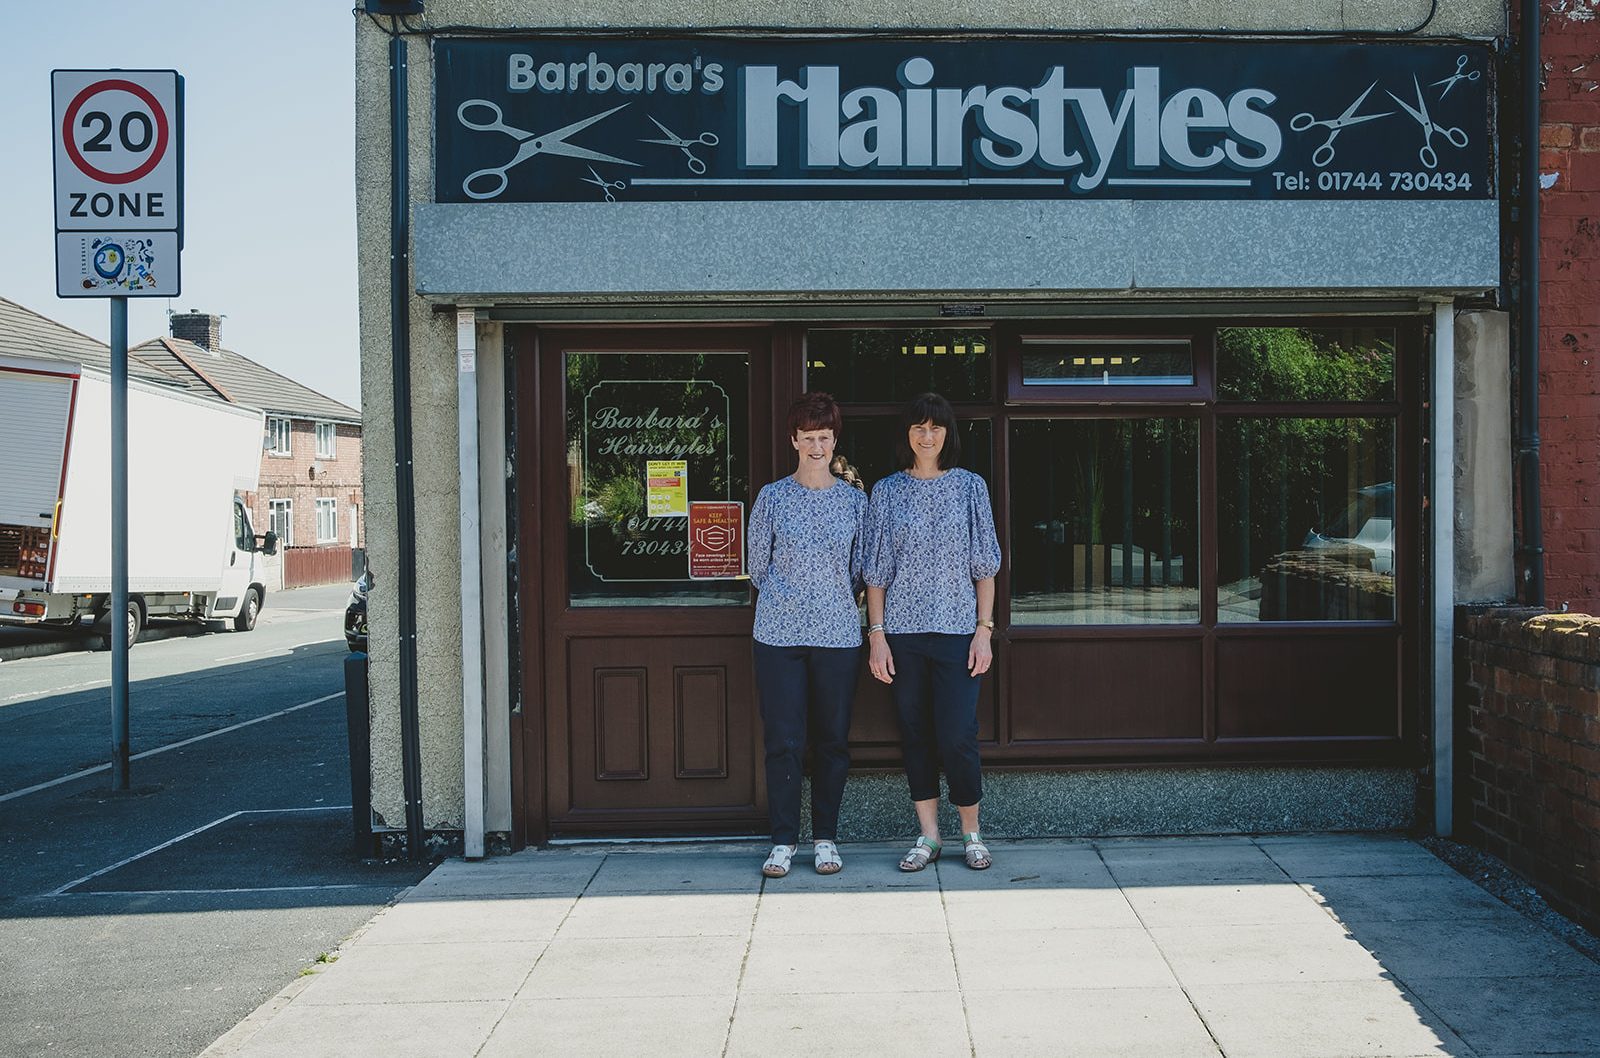 Two people stand smiling in matching outfits in front of a wooden panelled shop window. Above them is a large sign with a silver design on a black background which reads 'Barbara's Hairstyles' with scissors.